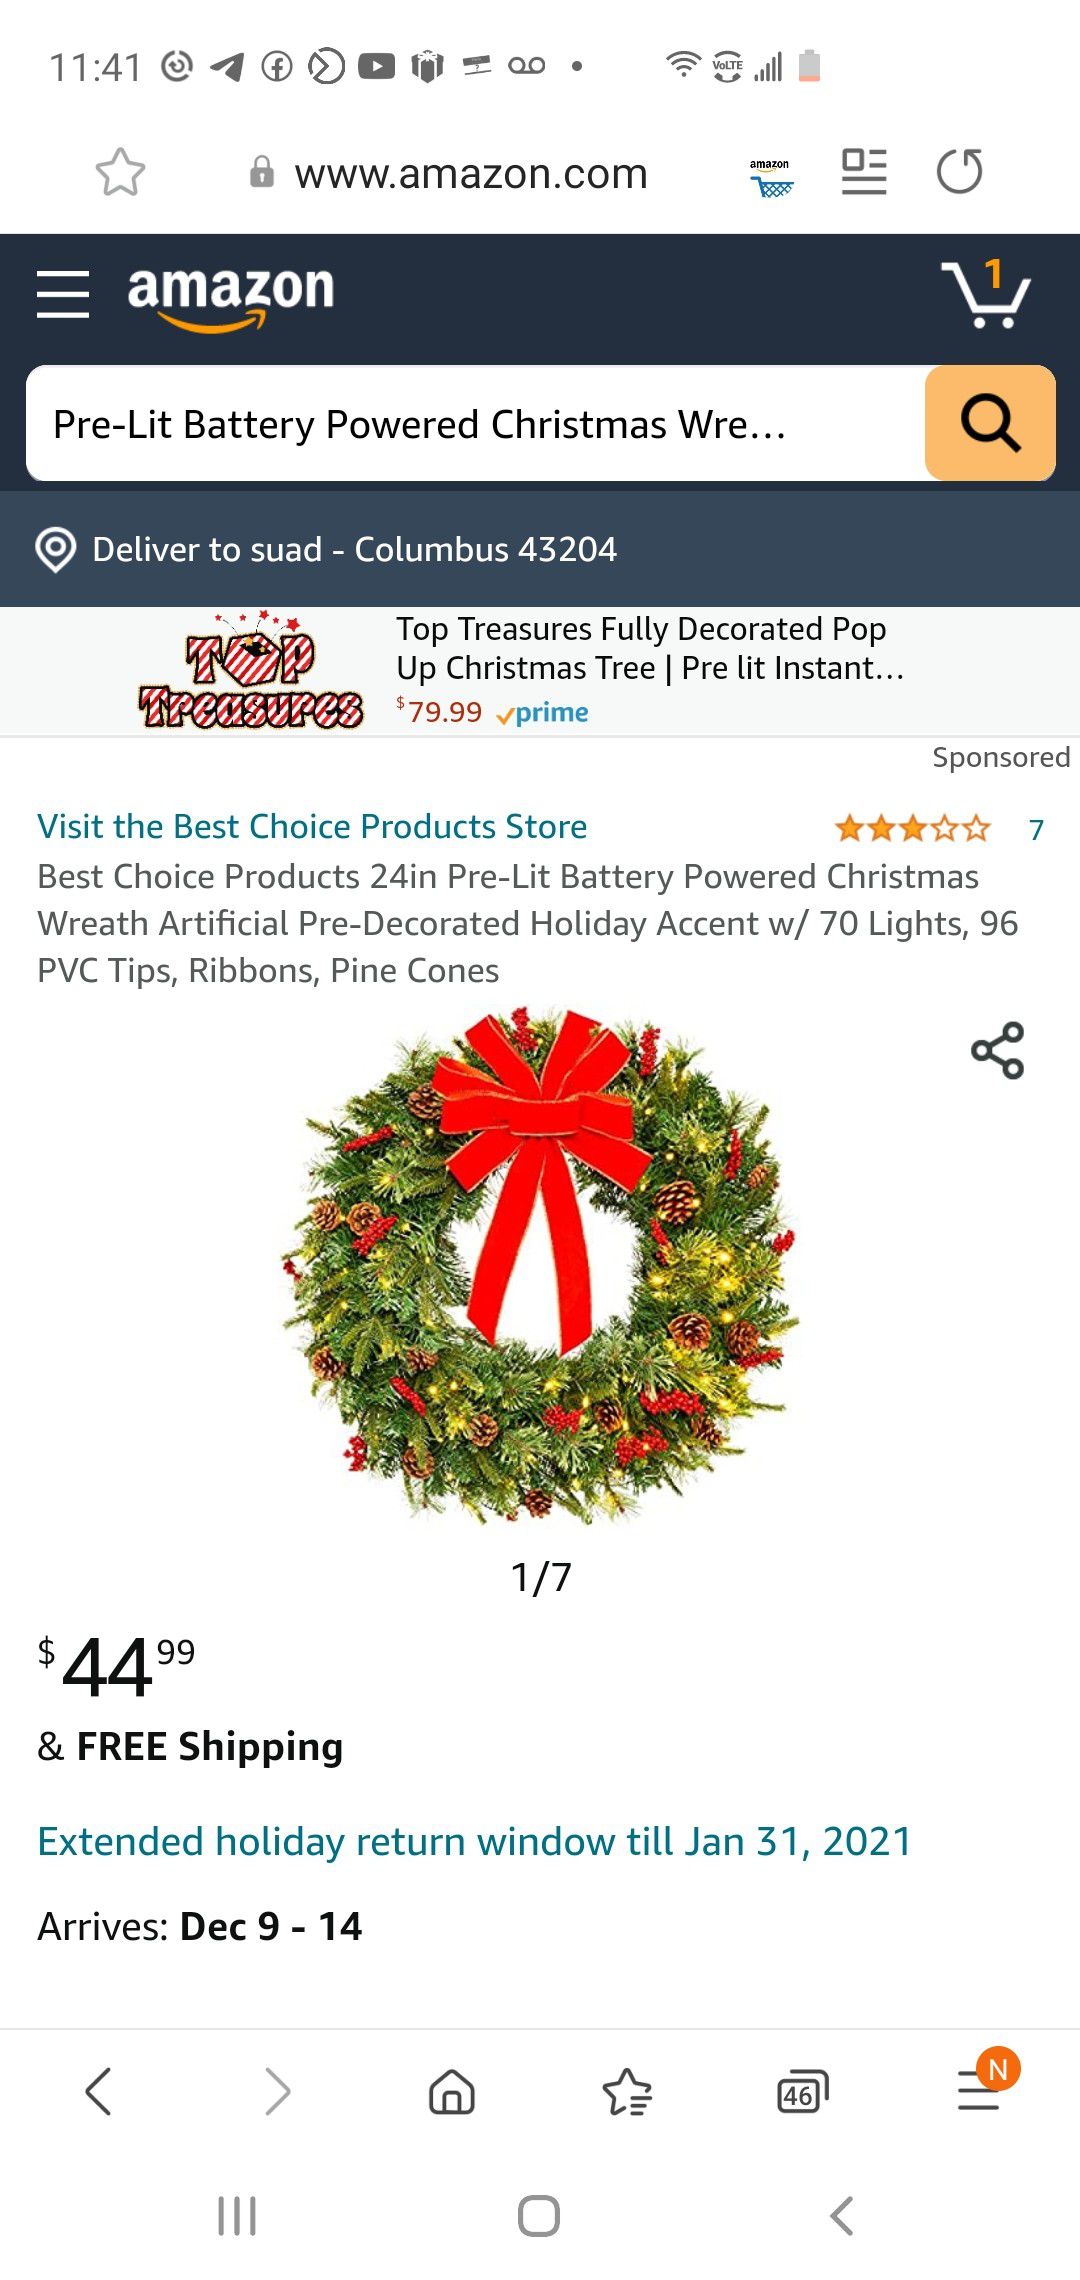 Best Choice Products 24in Pre-Lit Battery Powered Christmas Wreath Artificial Pre-Decorated Holiday Accent w/ 70 Lights, 96 PVC Tips, Ribbons, Pine